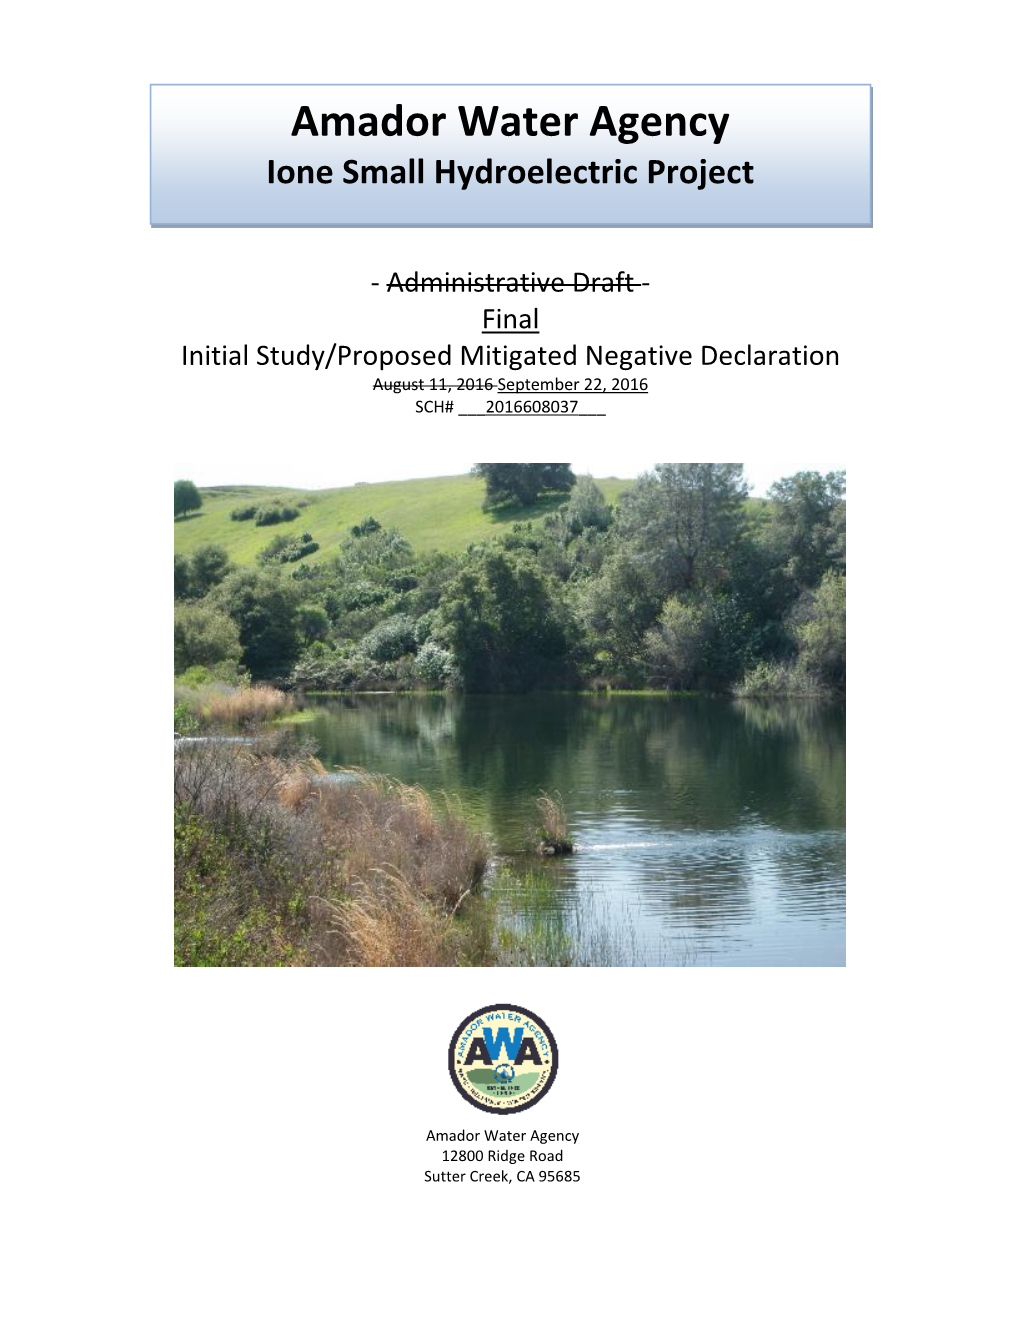 Amador Water Agency Ione Small Hydroelectric Project